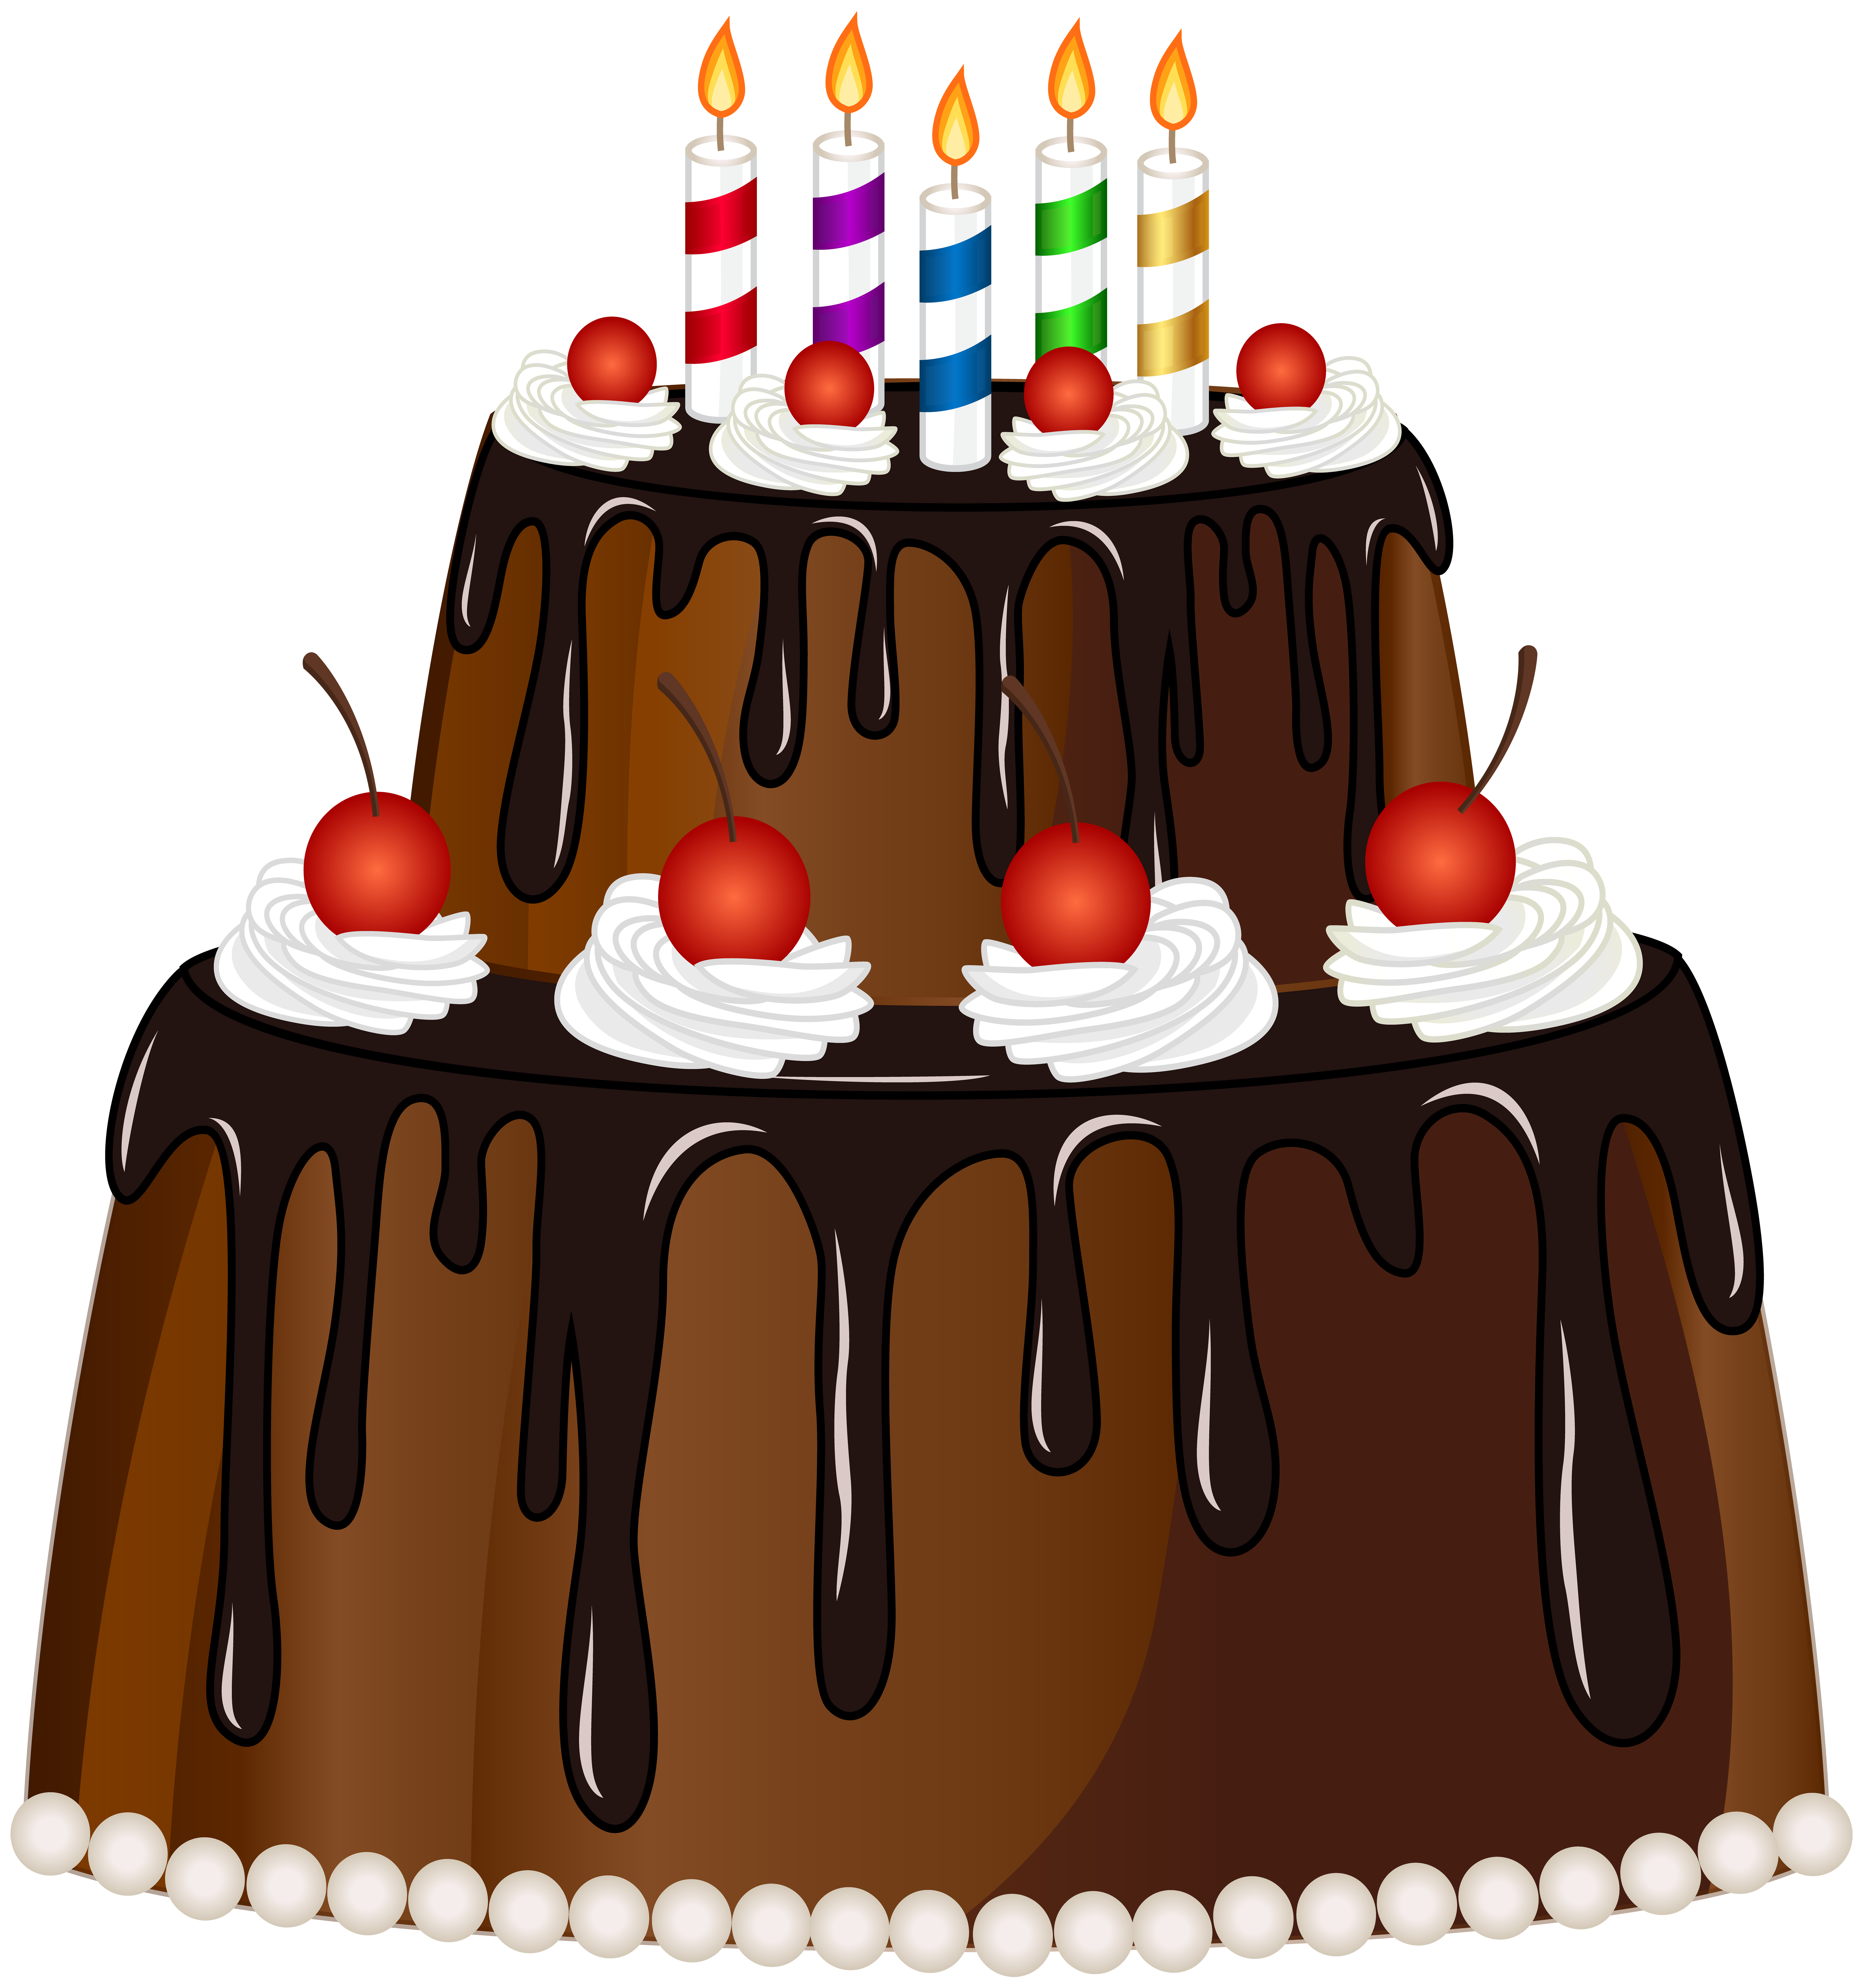 Birthday Cake PNG Clip Art Image | Gallery Yopriceville - High-Quality Free  Images and Tr… | Birthday cake clip art, Happy birthday cake images, Free  birthday stuff